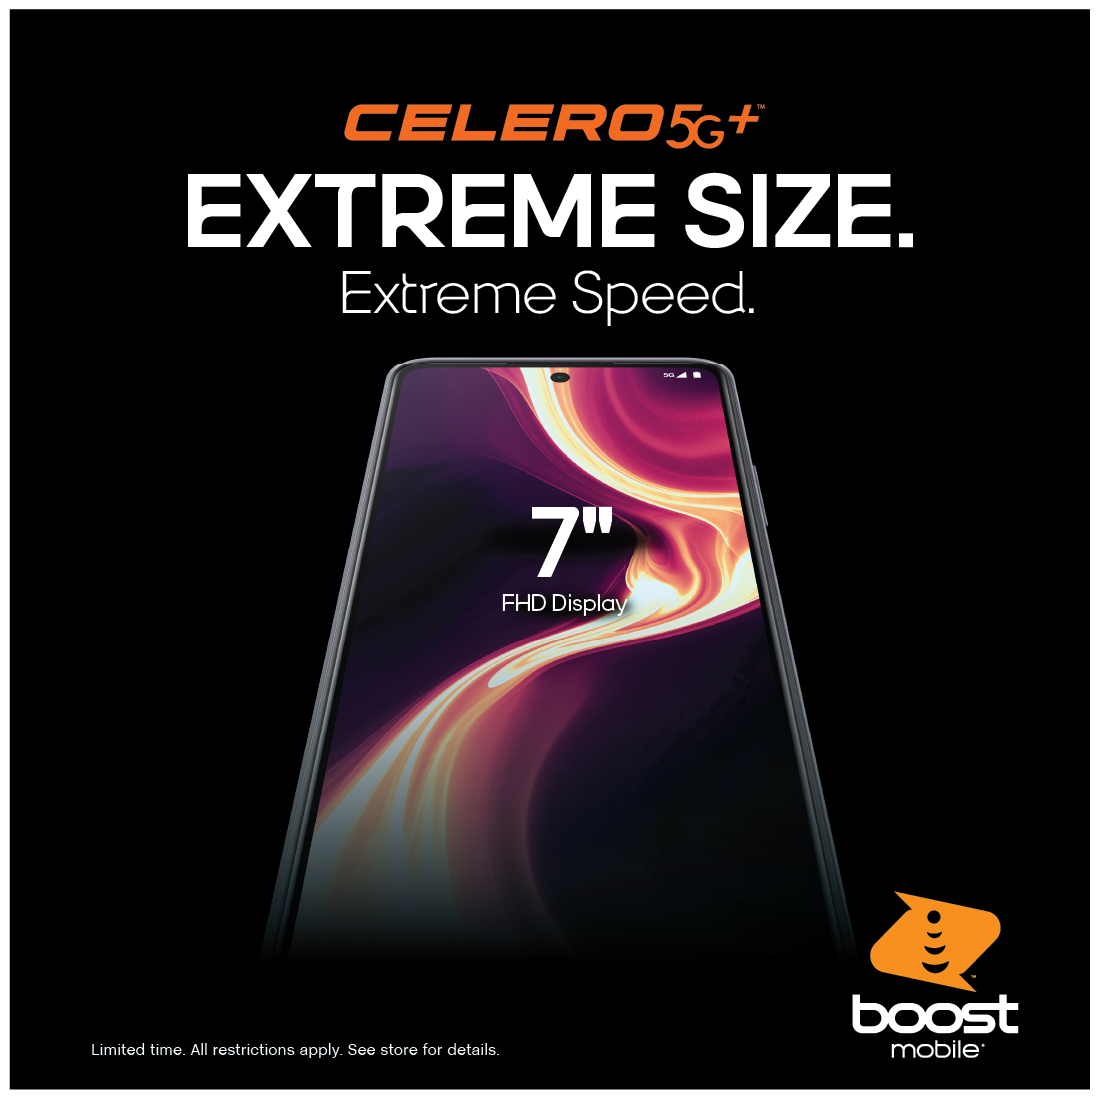 Boost Mobile’s All-New Exclusive 5G Smartphones, the Celero 5G+ and Celero 5G